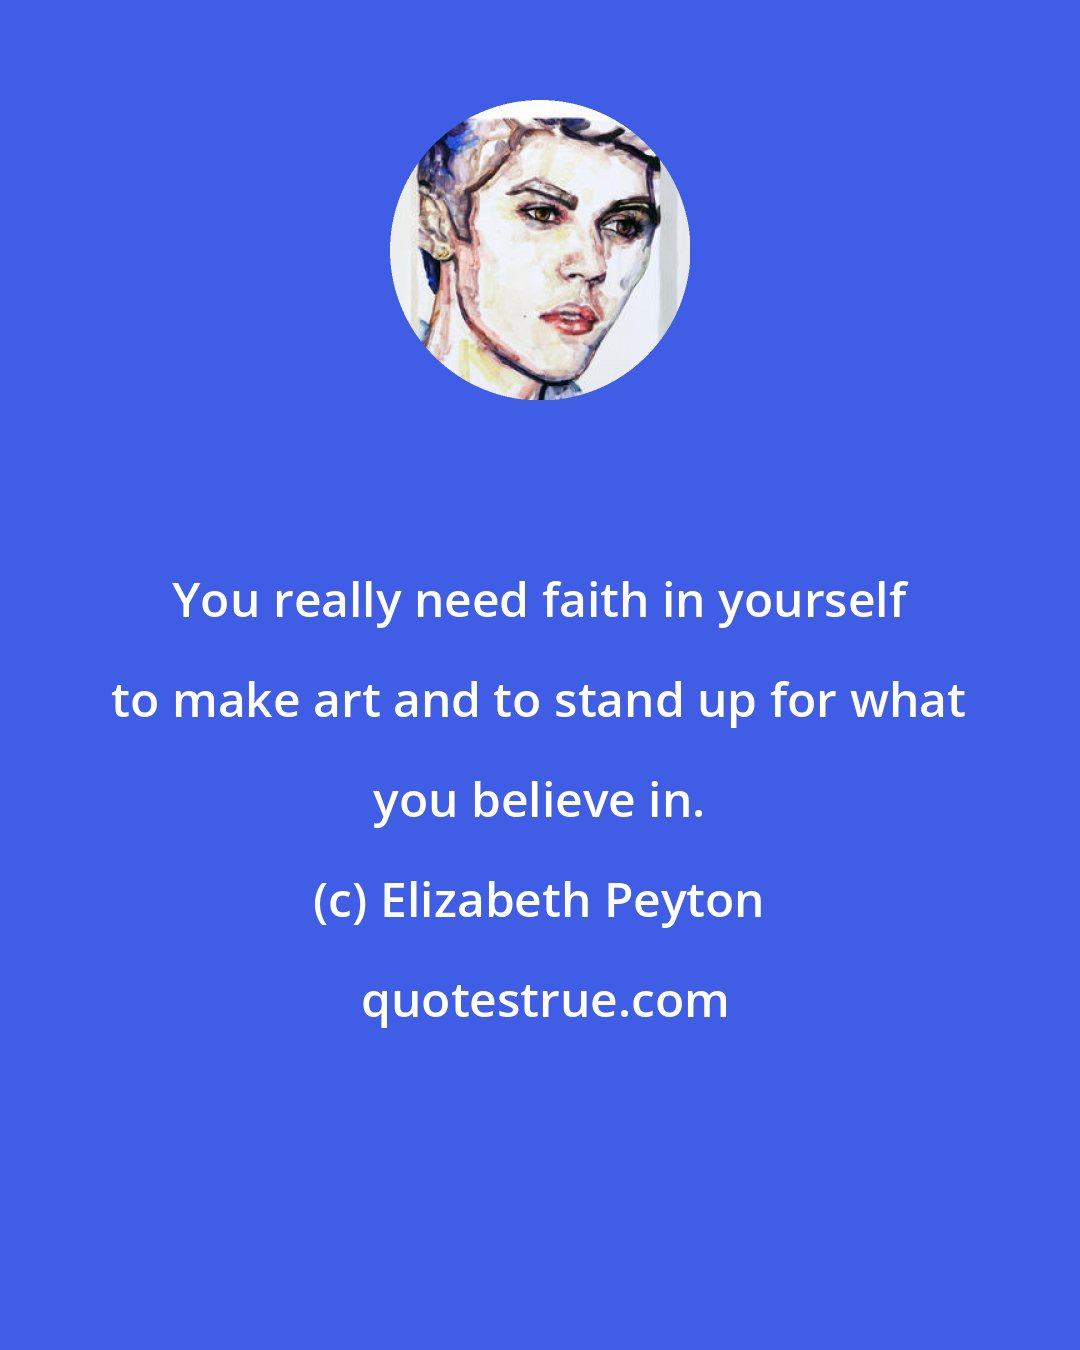 Elizabeth Peyton: You really need faith in yourself to make art and to stand up for what you believe in.